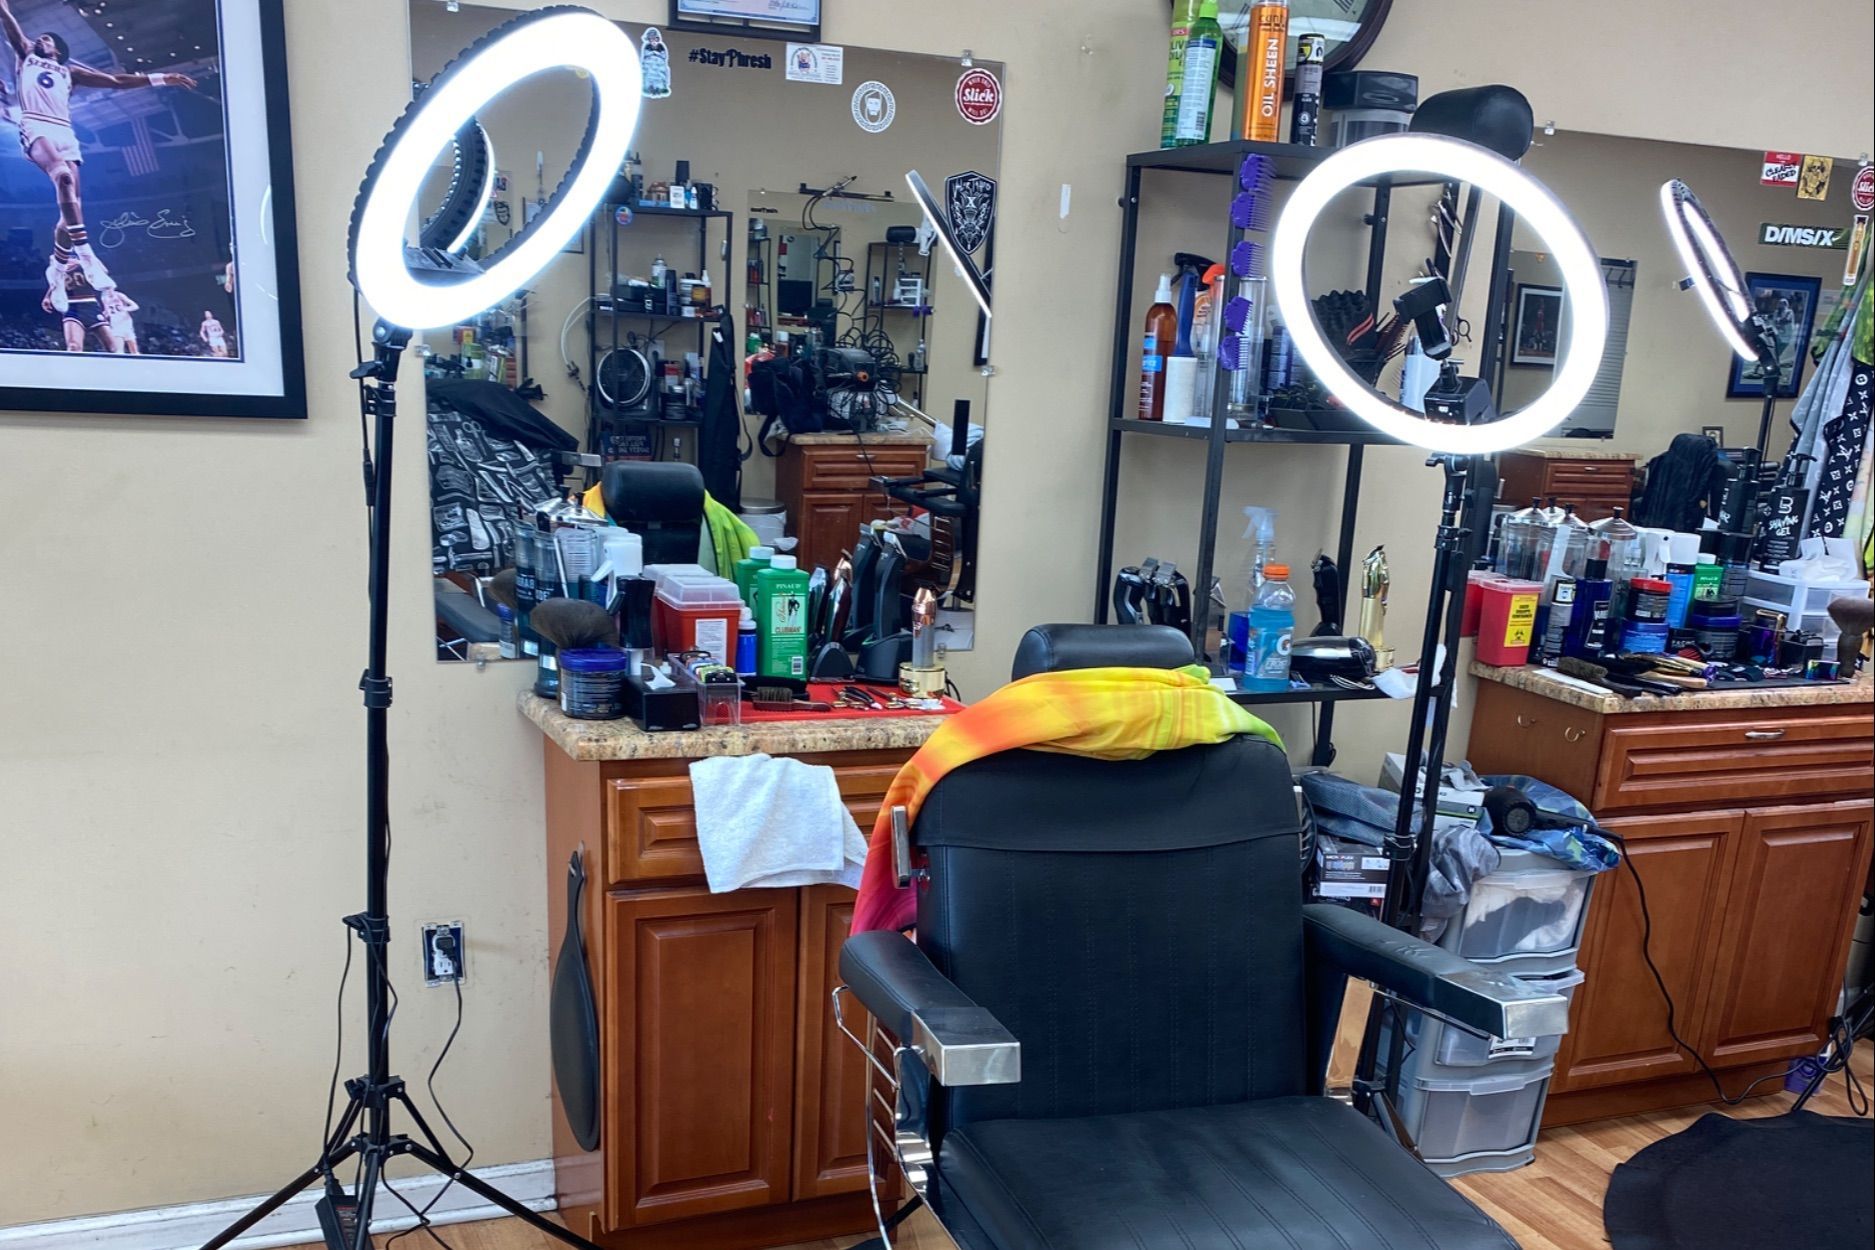 Levittown Barber Shop • Prices, Hours, Reviews etc.